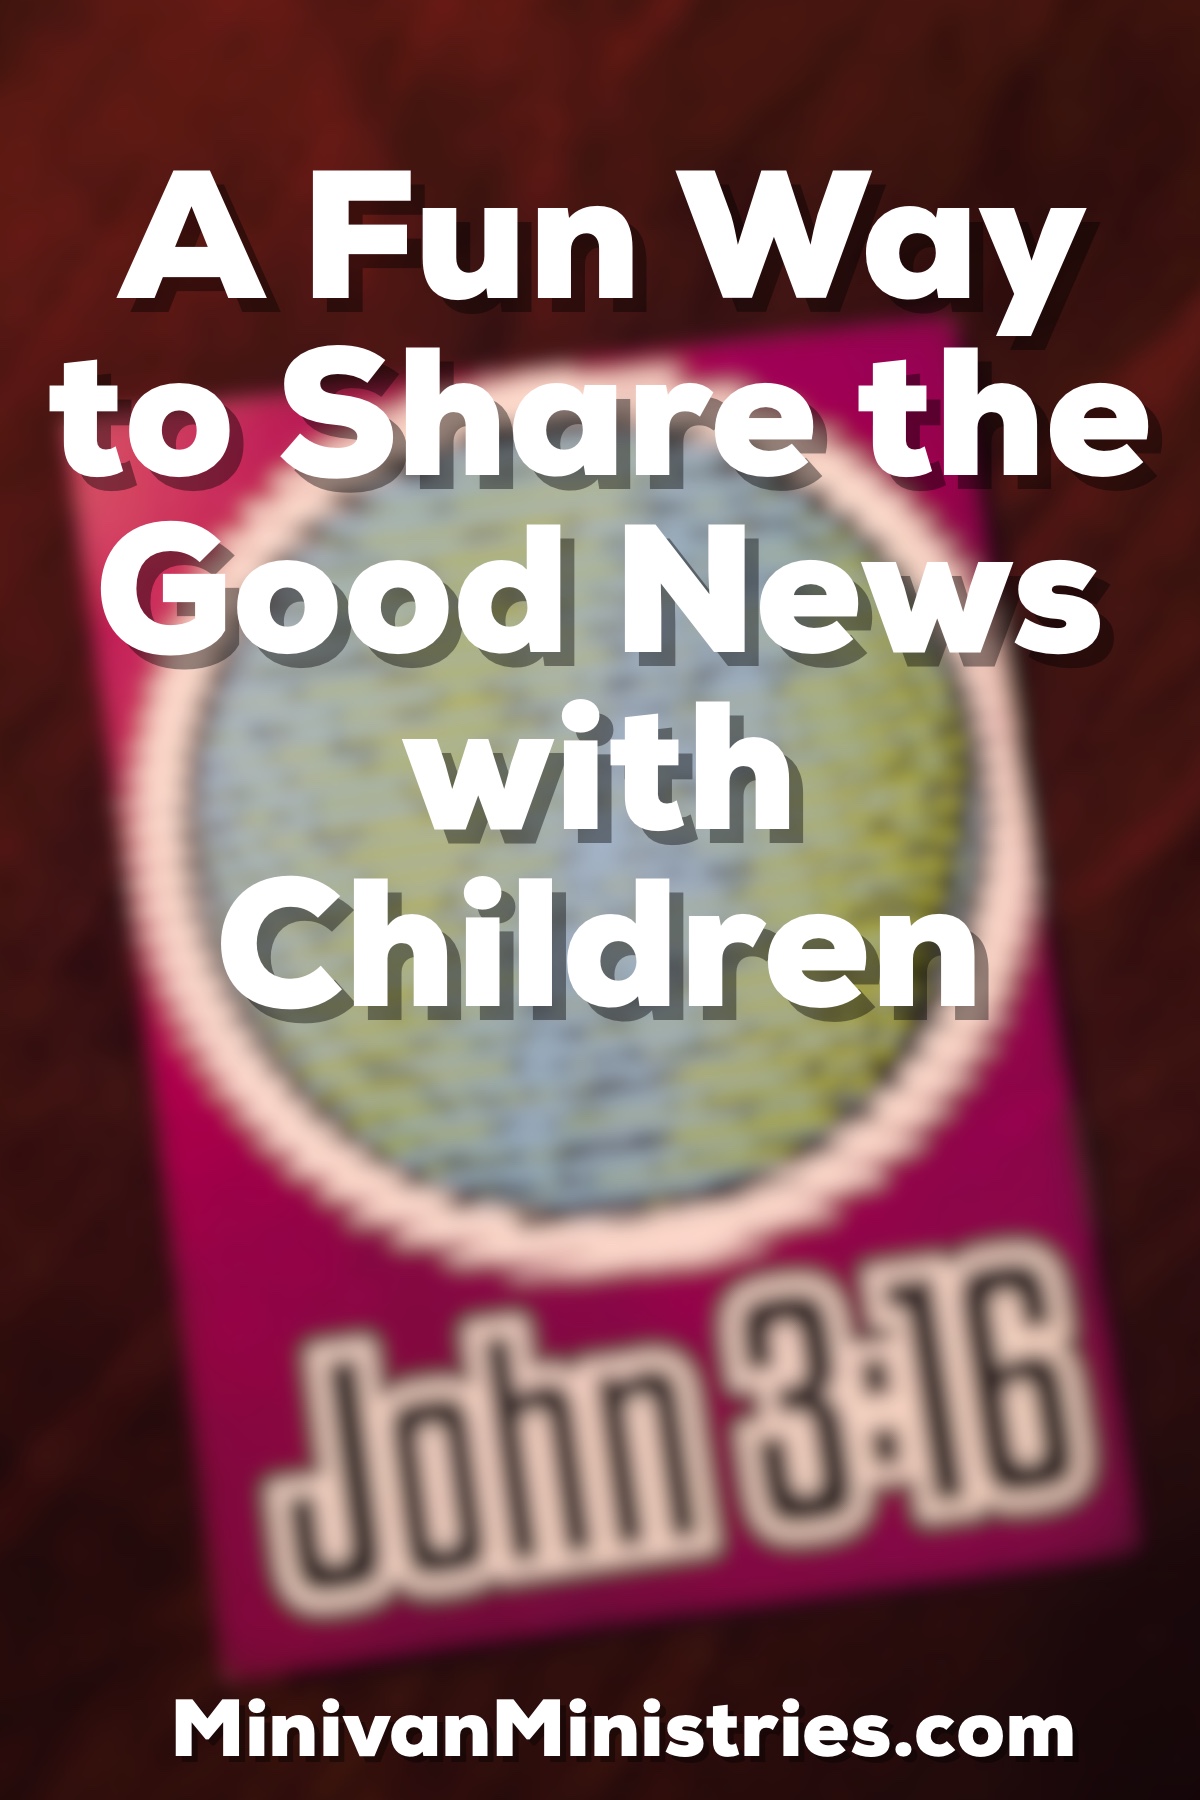 A Fun Way to Share the Good News with Children